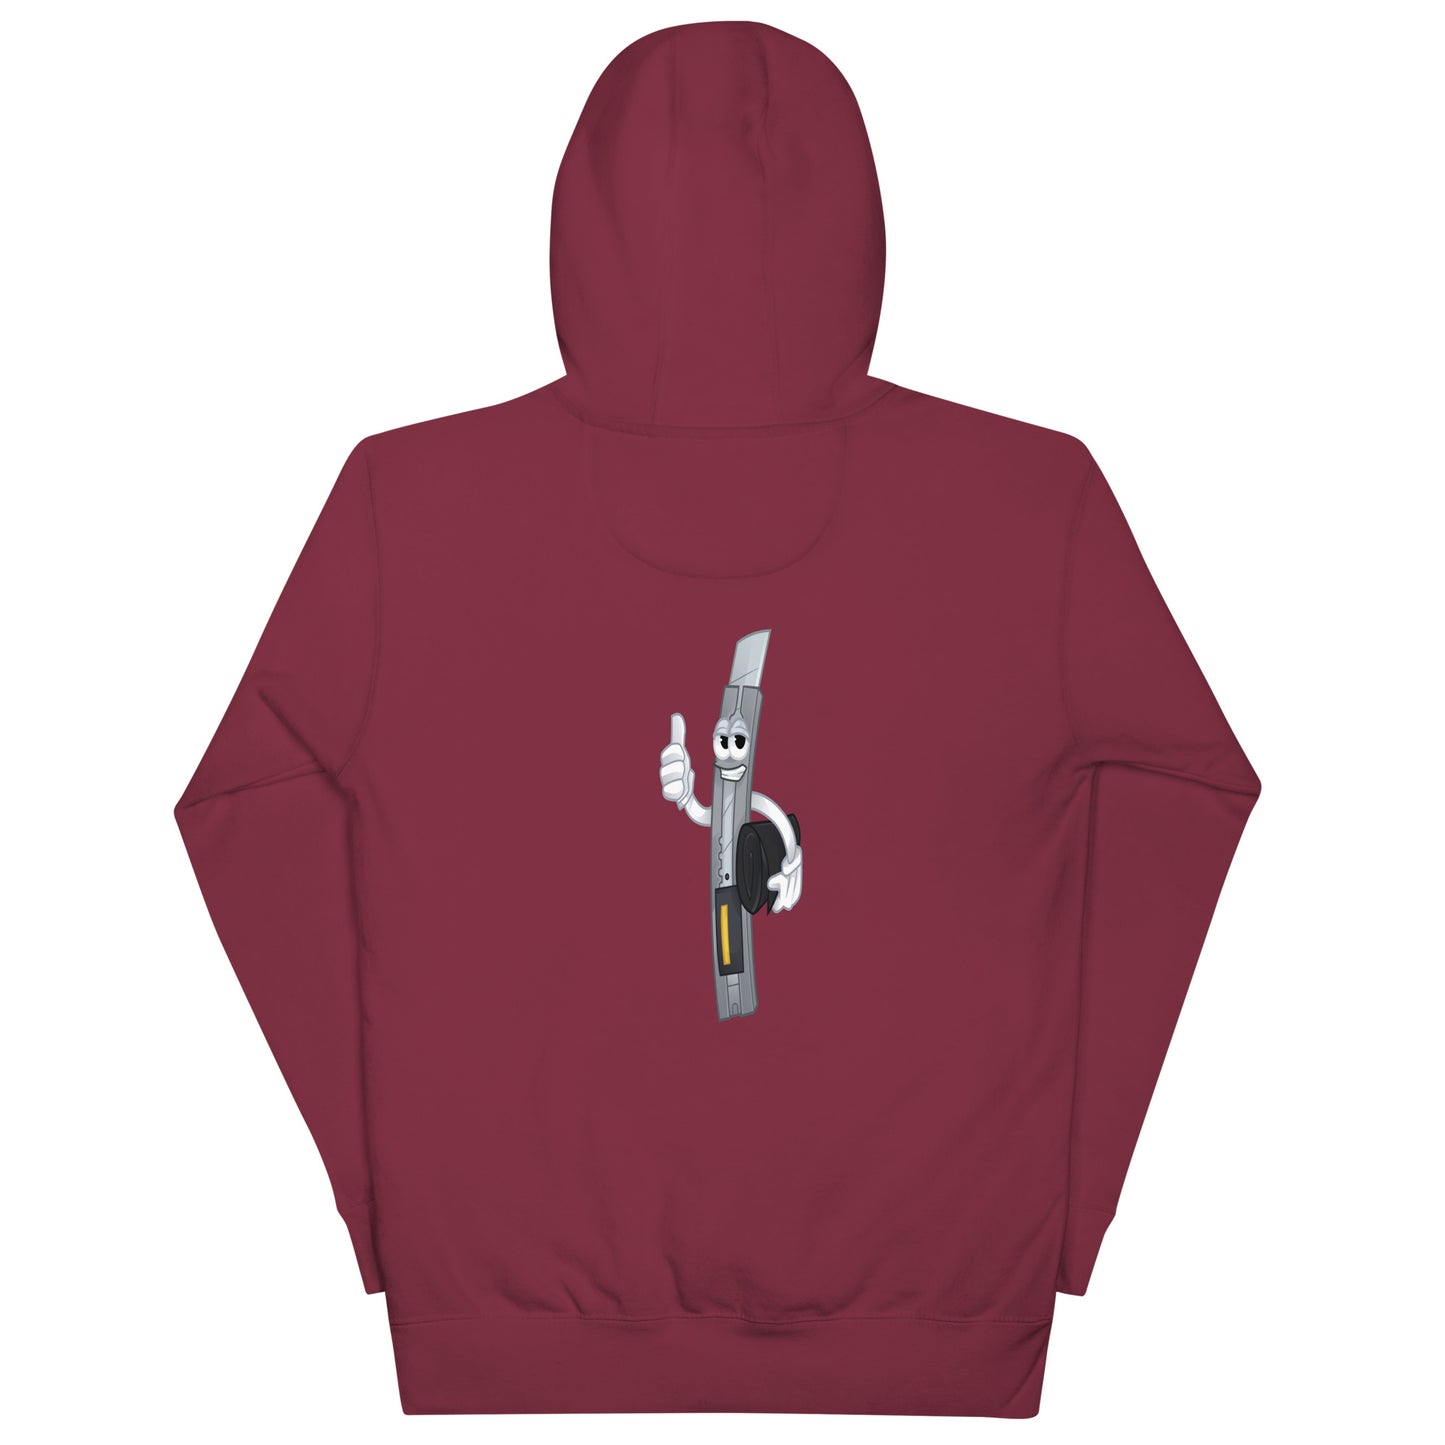 TINT by Pro Tinter Unisex Hoodie